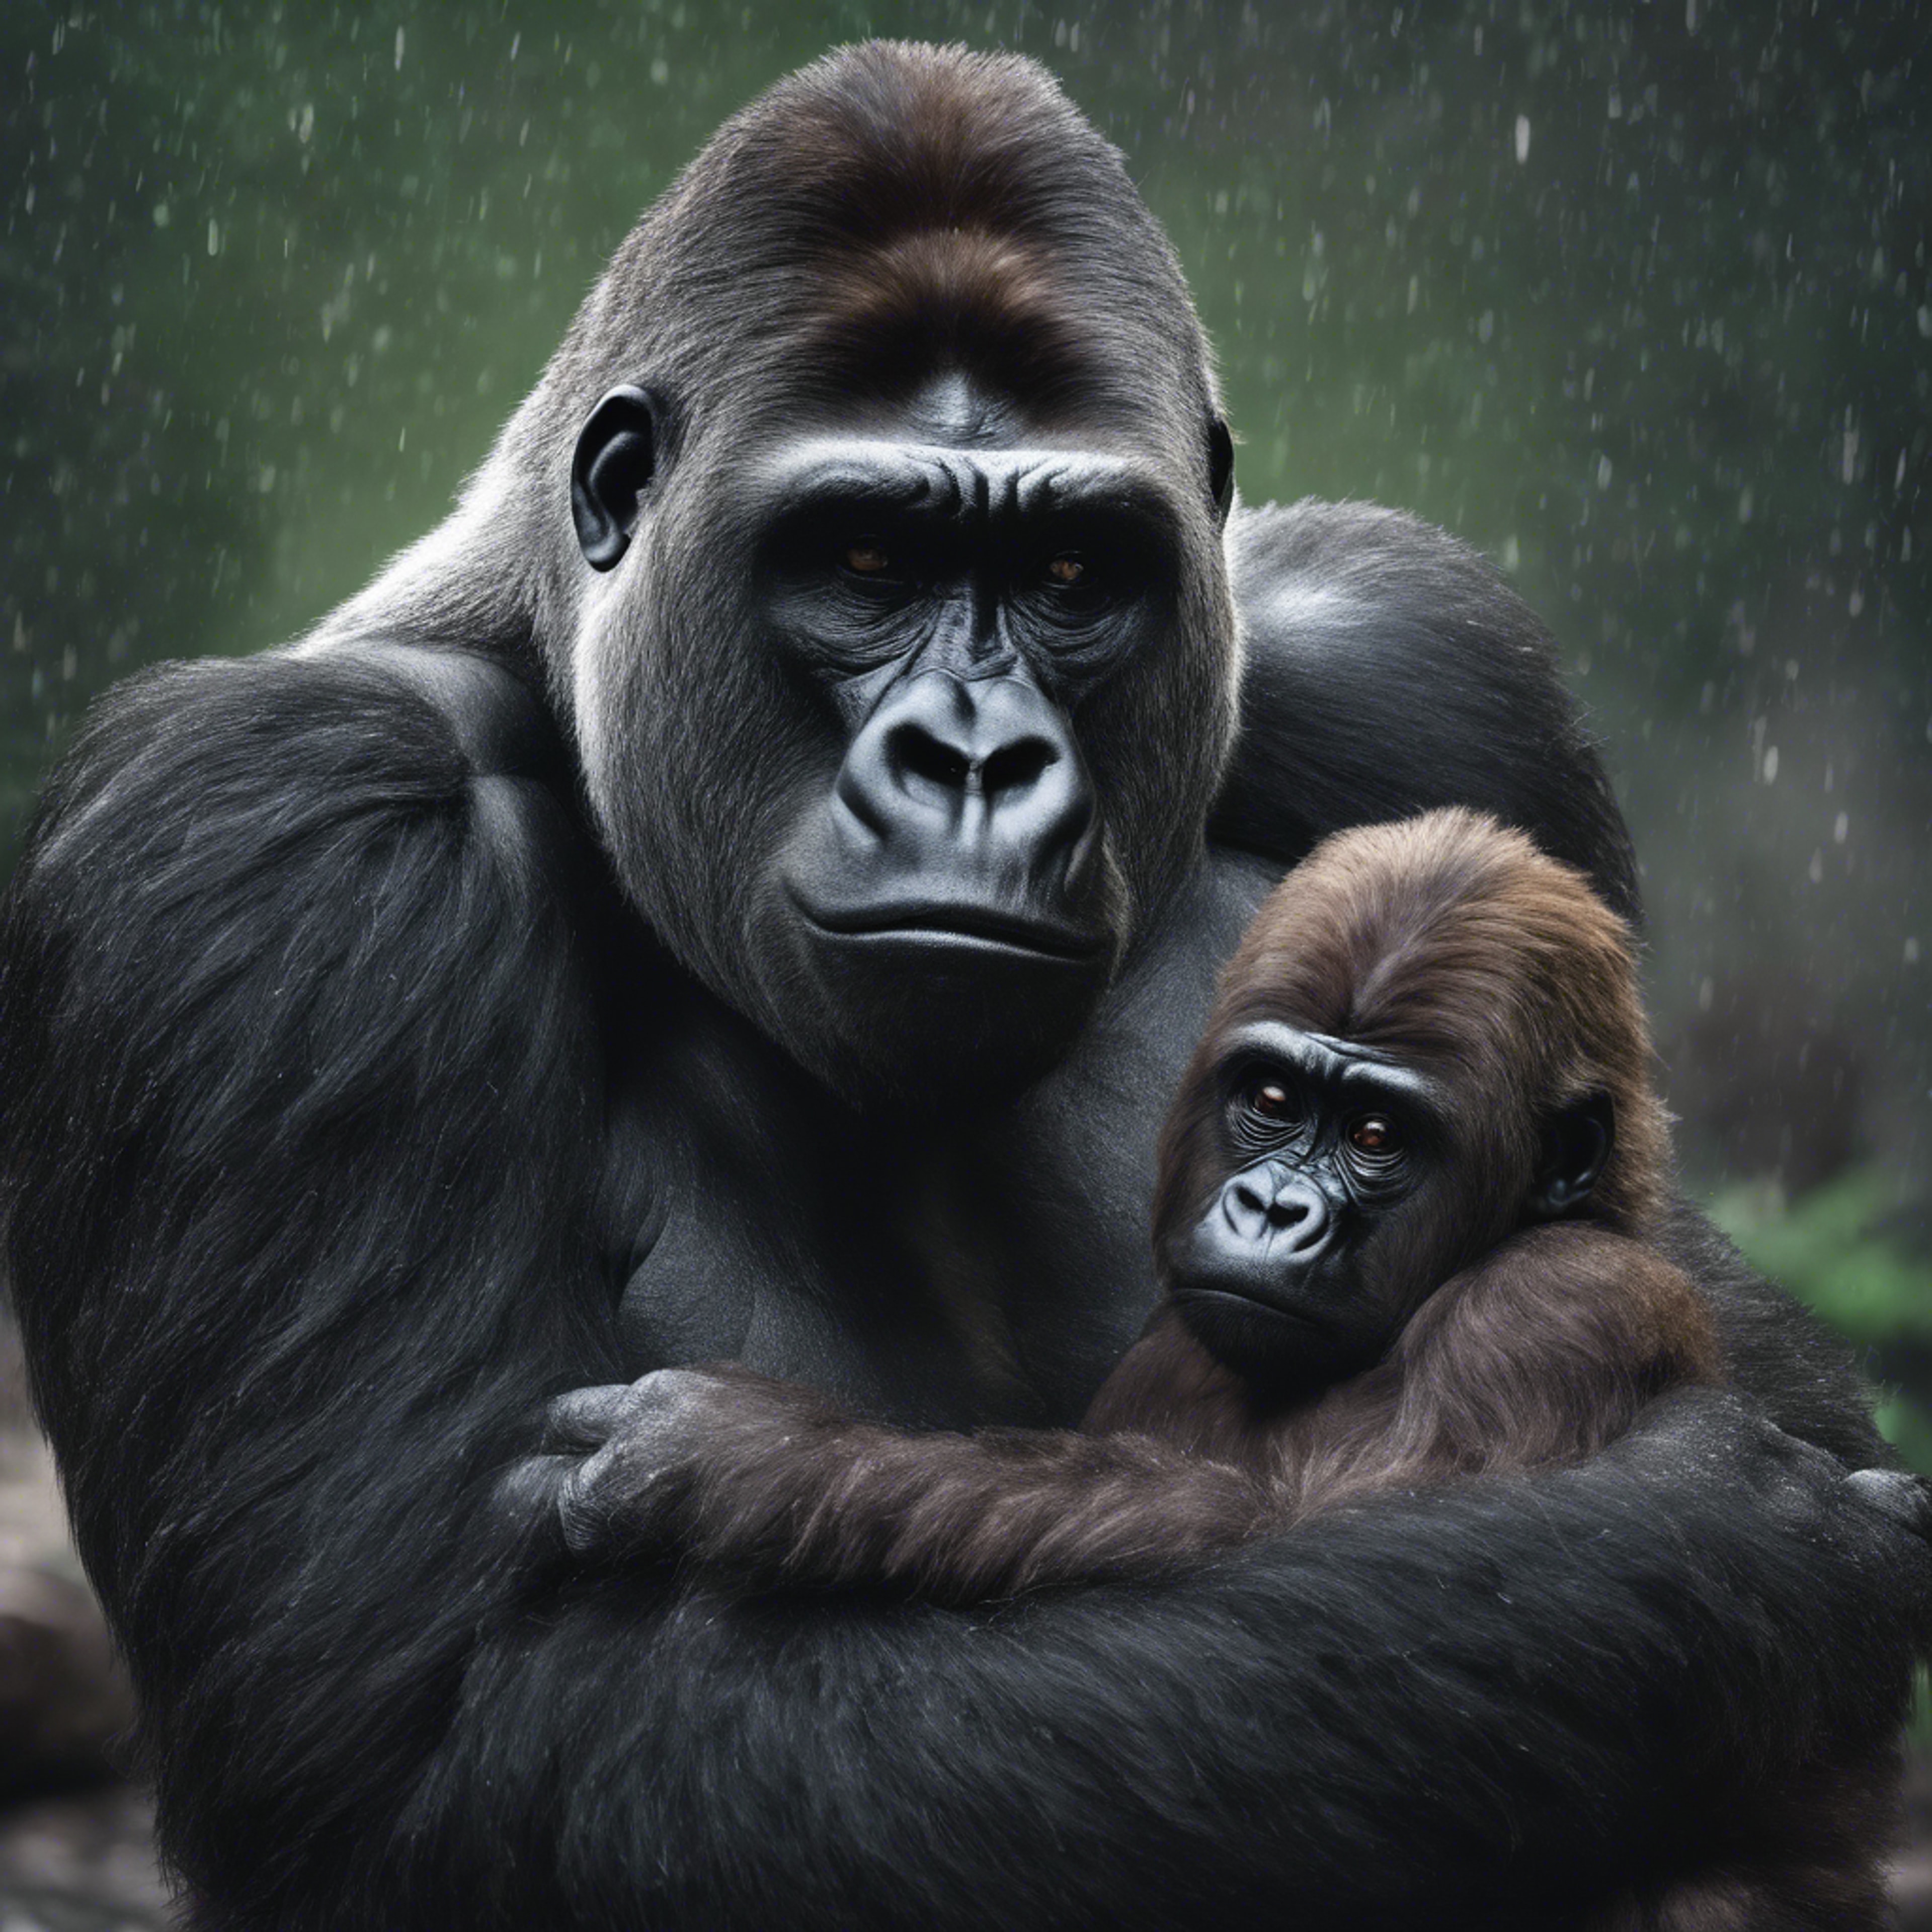 A soft, sensitive study of a gorilla father gently comforting his scared offspring during a thunderstorm. Tapéta[6d897e1fa87d4d60b202]